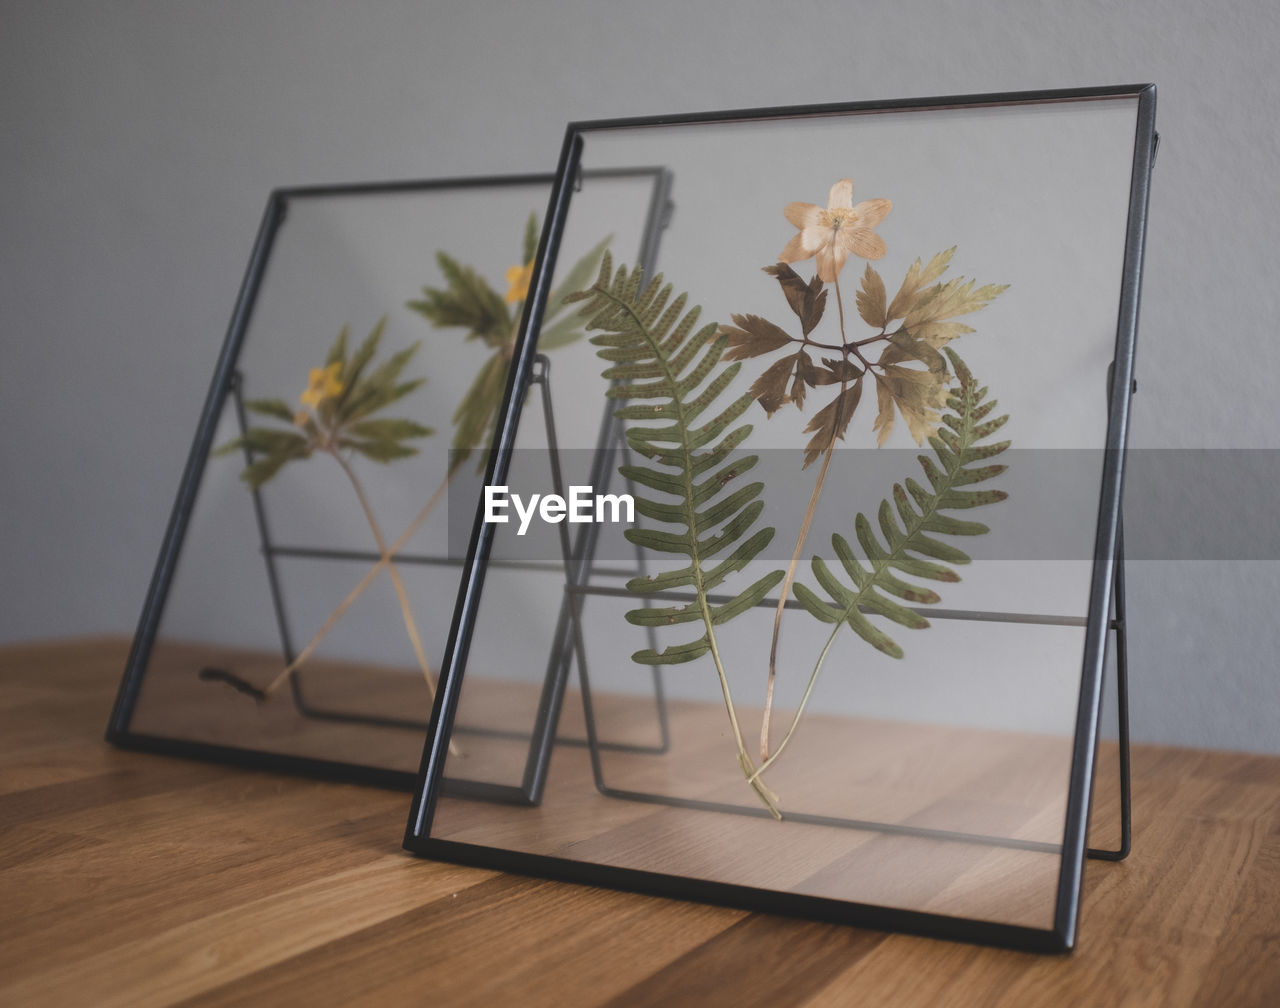 Dryed flowers in a picture frame